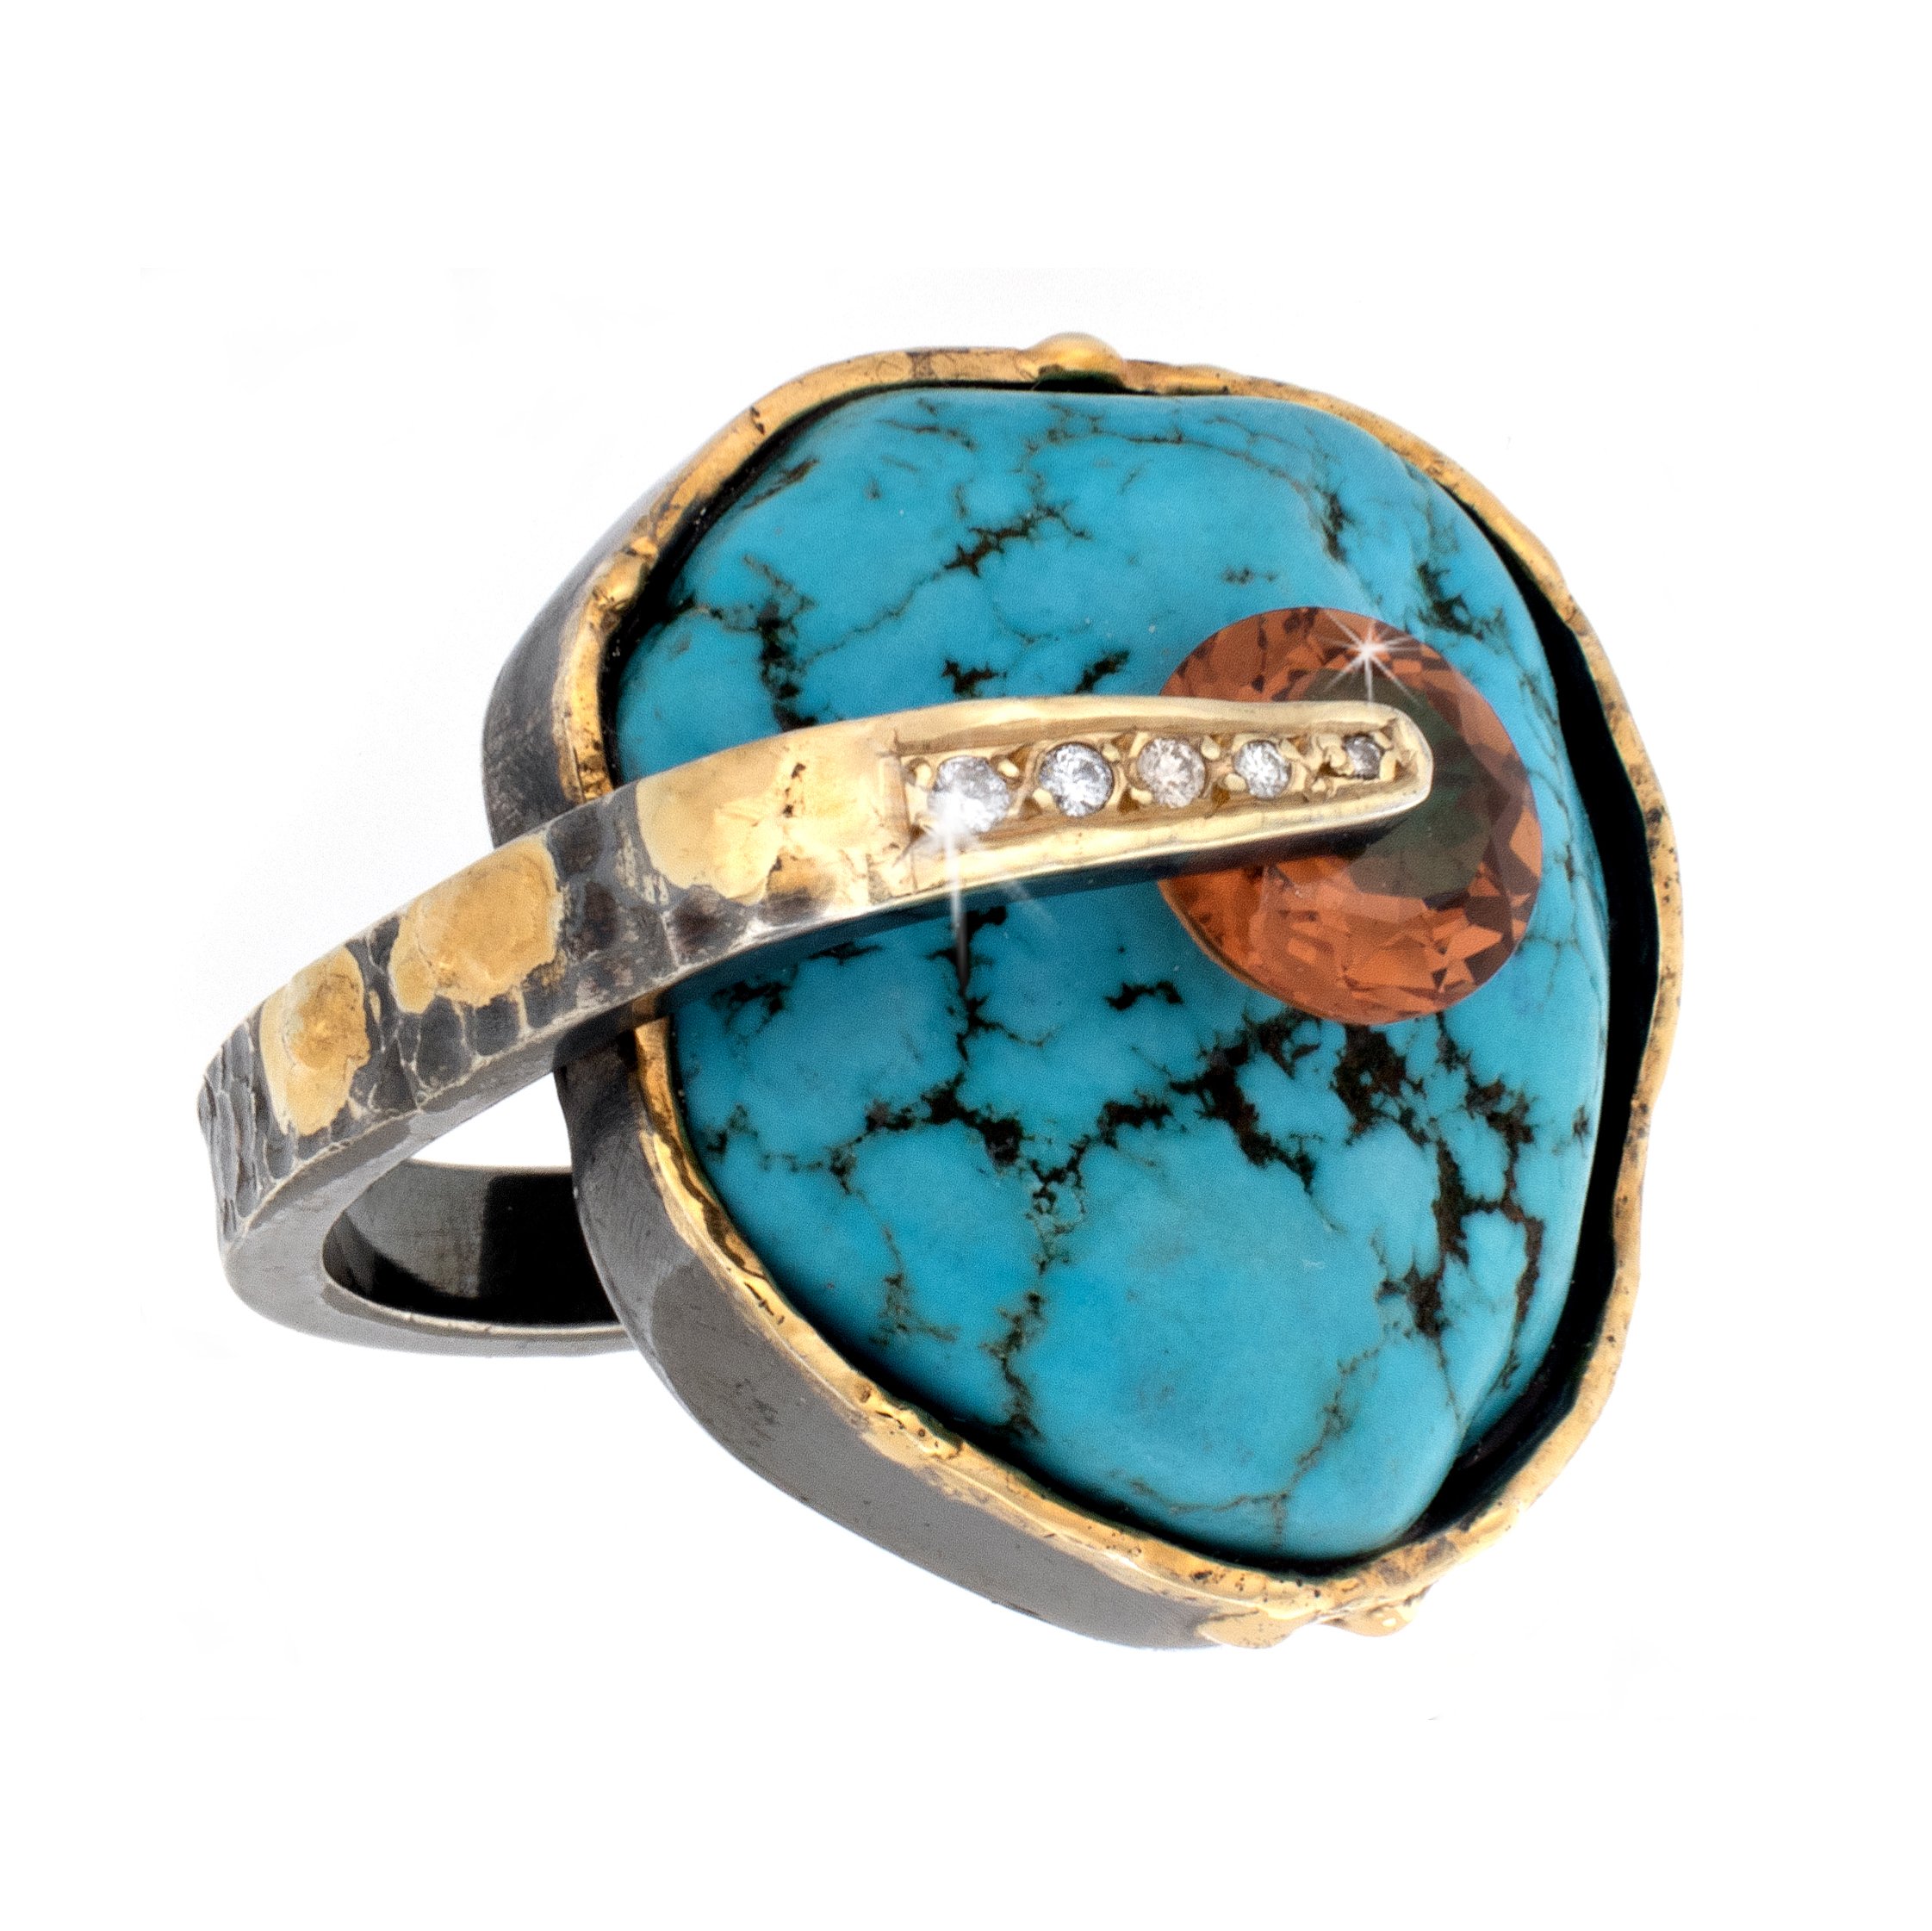 Chinese Turquoise Ring Size 9 - Nugget With Faceted Brilliant Zultanite Set Above With Oxidized Sterling Silver Arm Descending Pave 5 Diamonds - Hammered Oxidized Sterling Silver Band With Gold Vermeil Accents